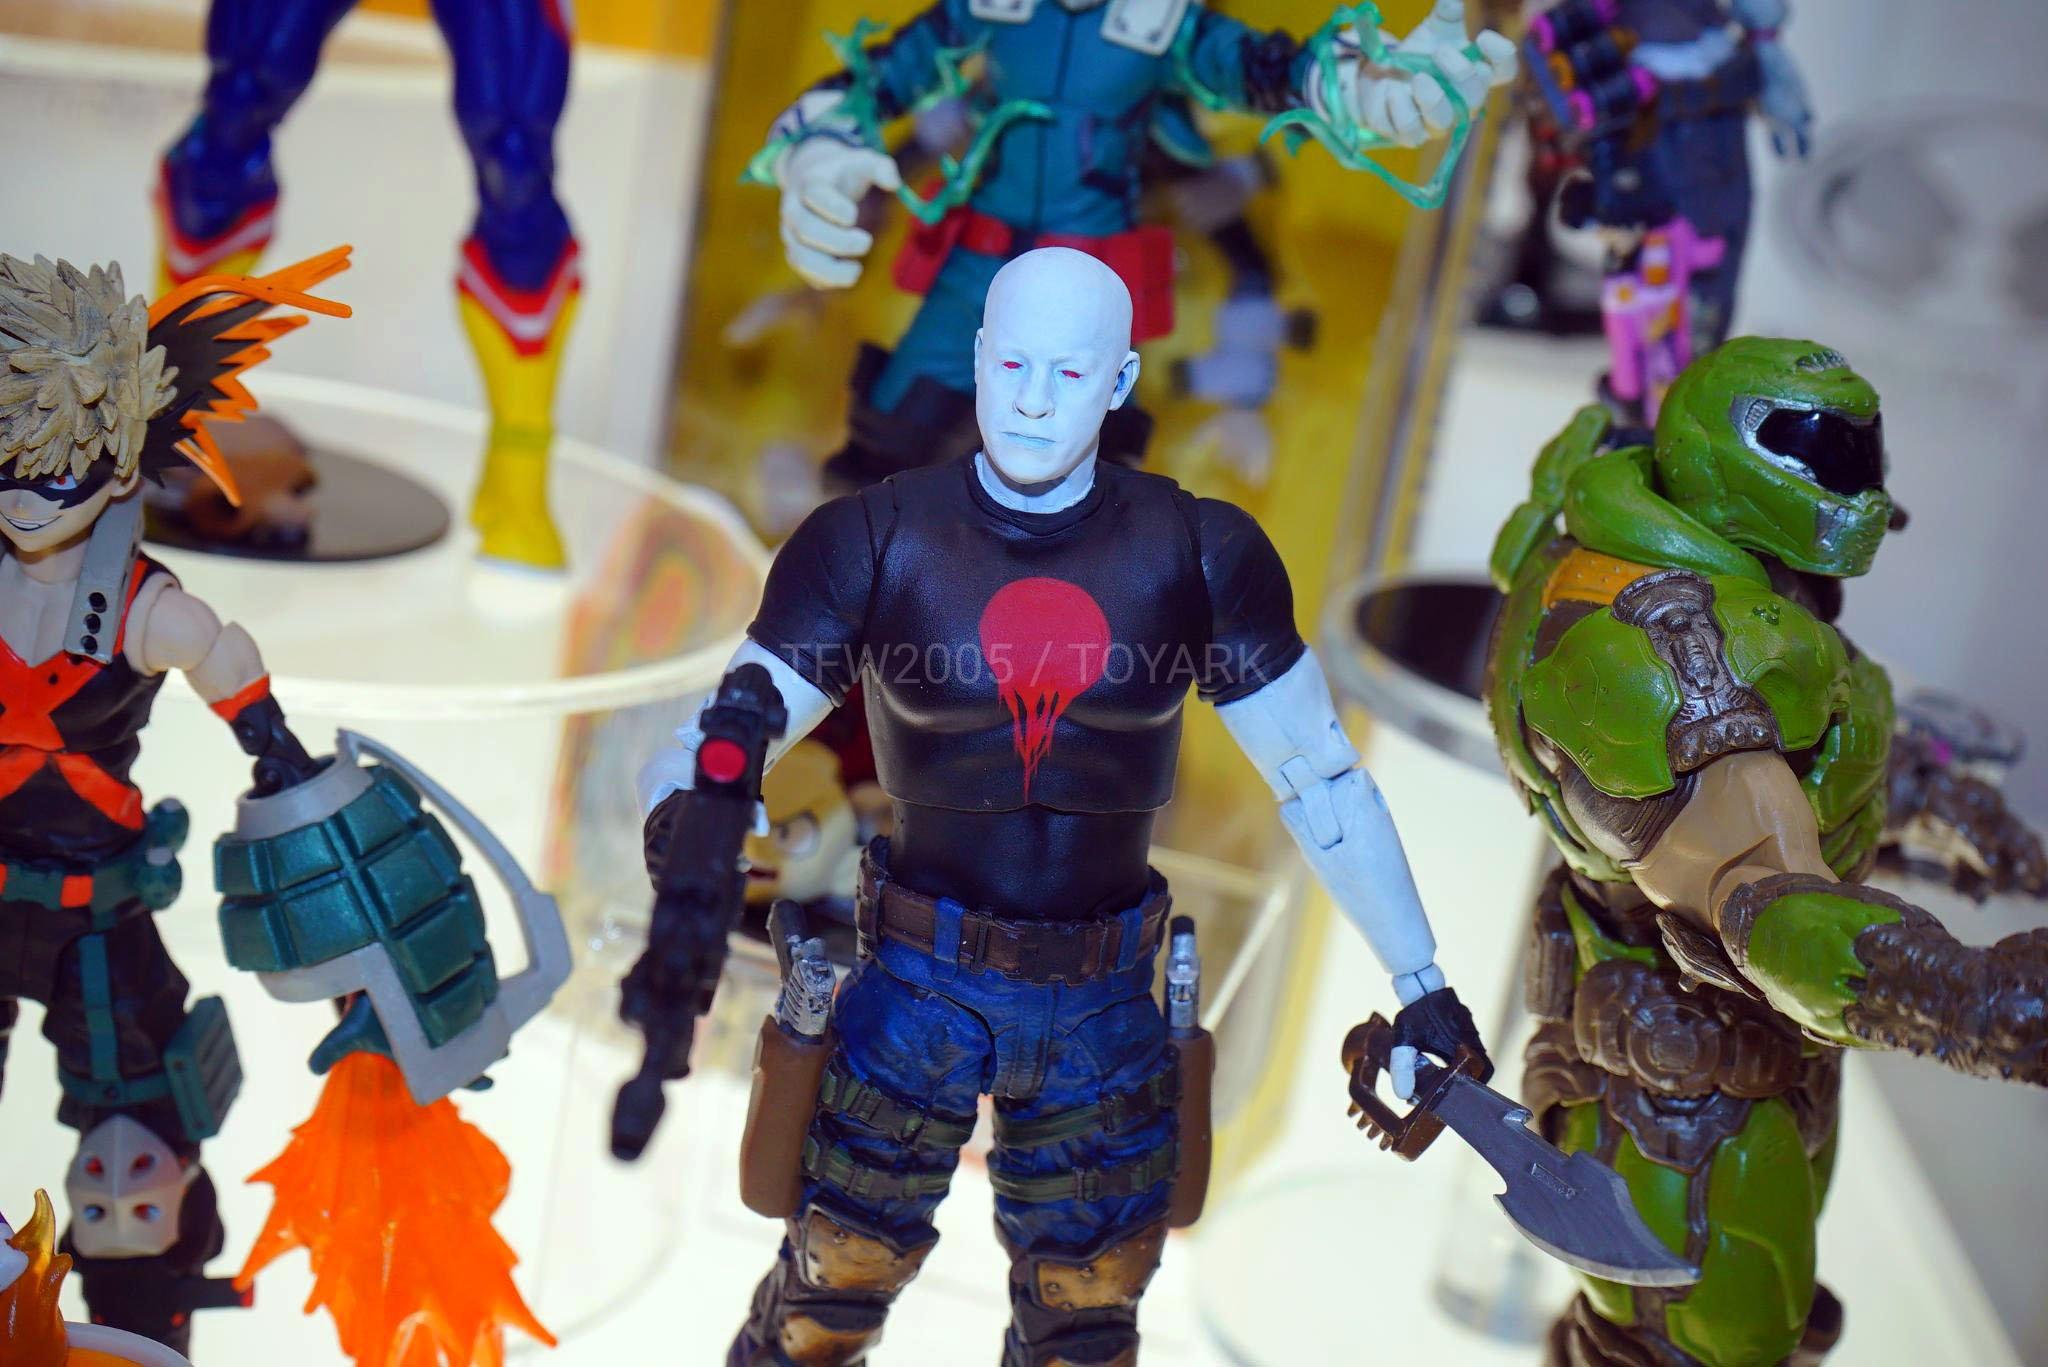 BLOODSHOT Action Figure Offers Our First Look At Vin Diesel